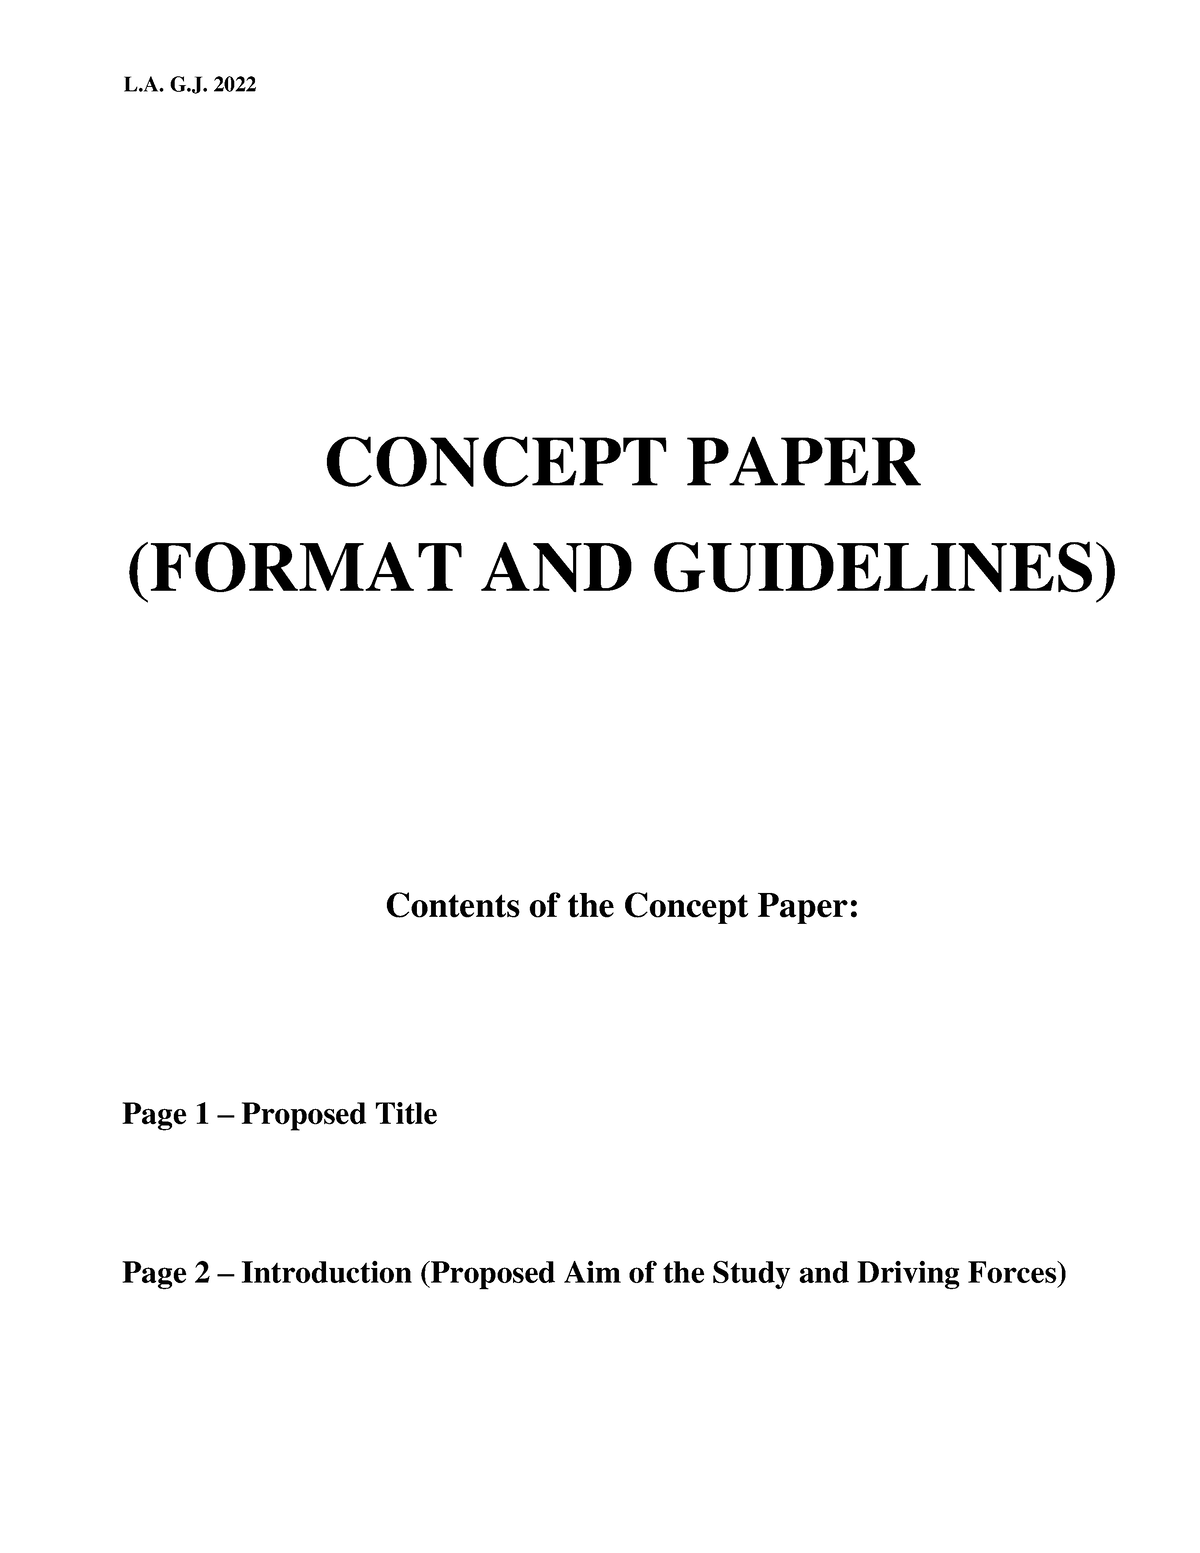 academic research concept paper